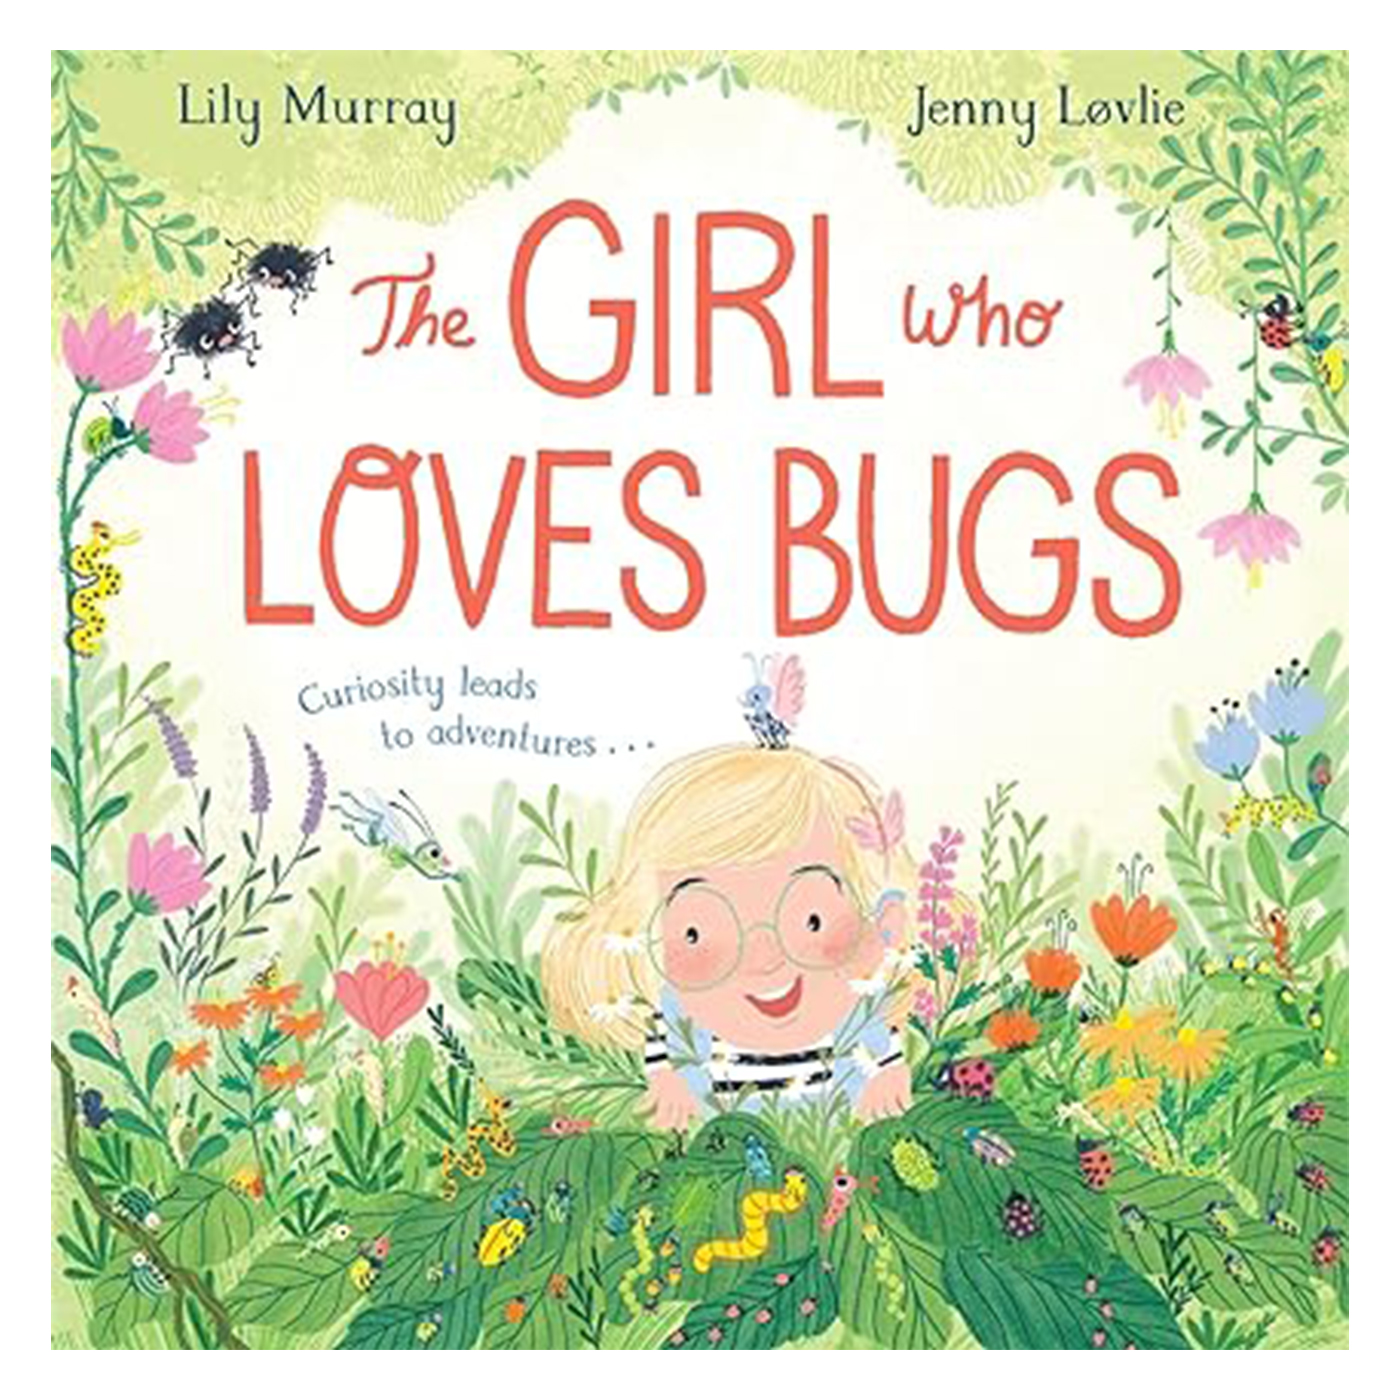  The Girl Who Loves Bugs